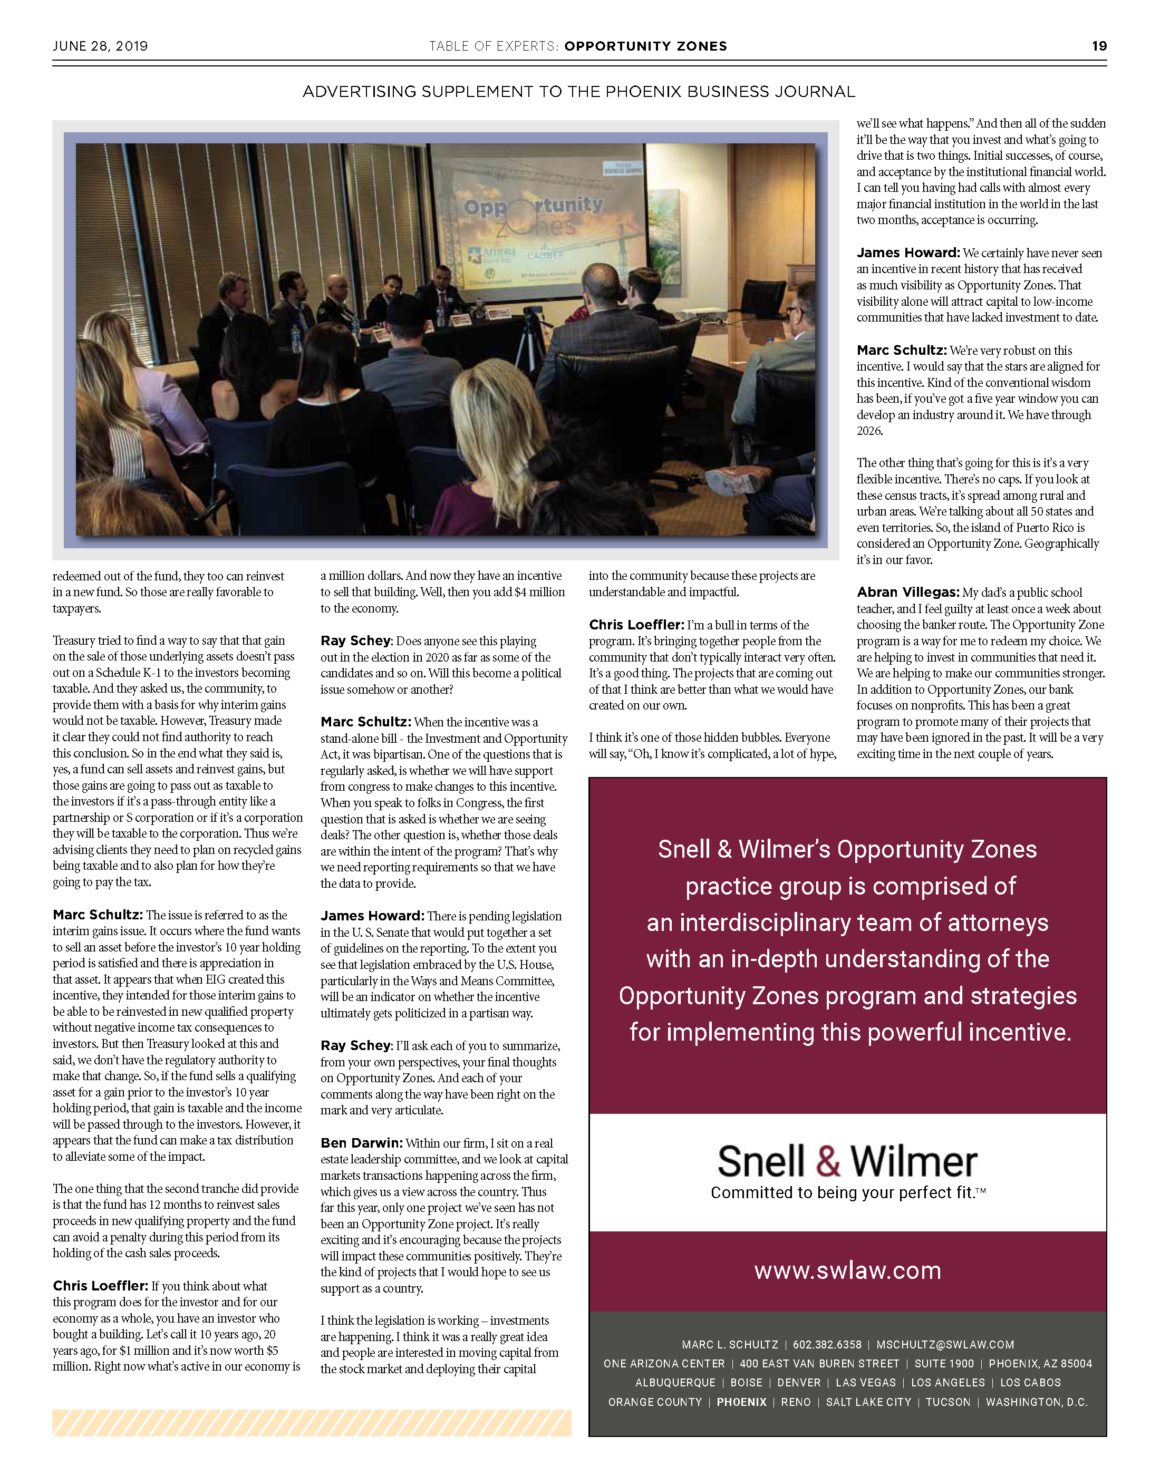 Advertising supplement to the June 2019 edition of Phoenix Business Journal — the 2019 Table of Experts discusses opportunity zone investing and its broader impact on the America's communities.